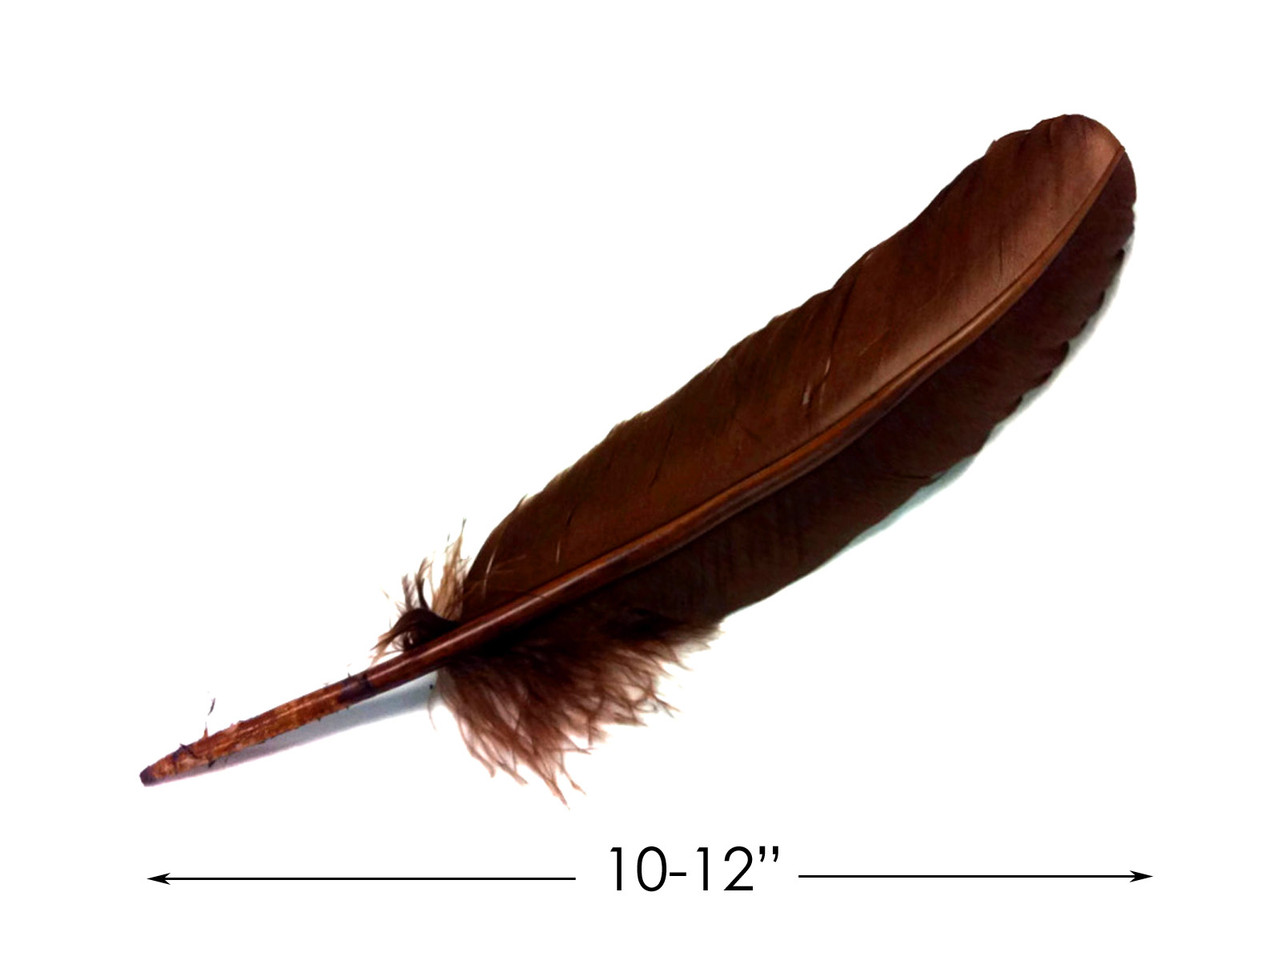 Raven Wing Feathers, 1/4 Lb Brown Turkey Pointers Quill Wing Wholesale  Feathers bulk Halloween Costume Fletching : 3628 